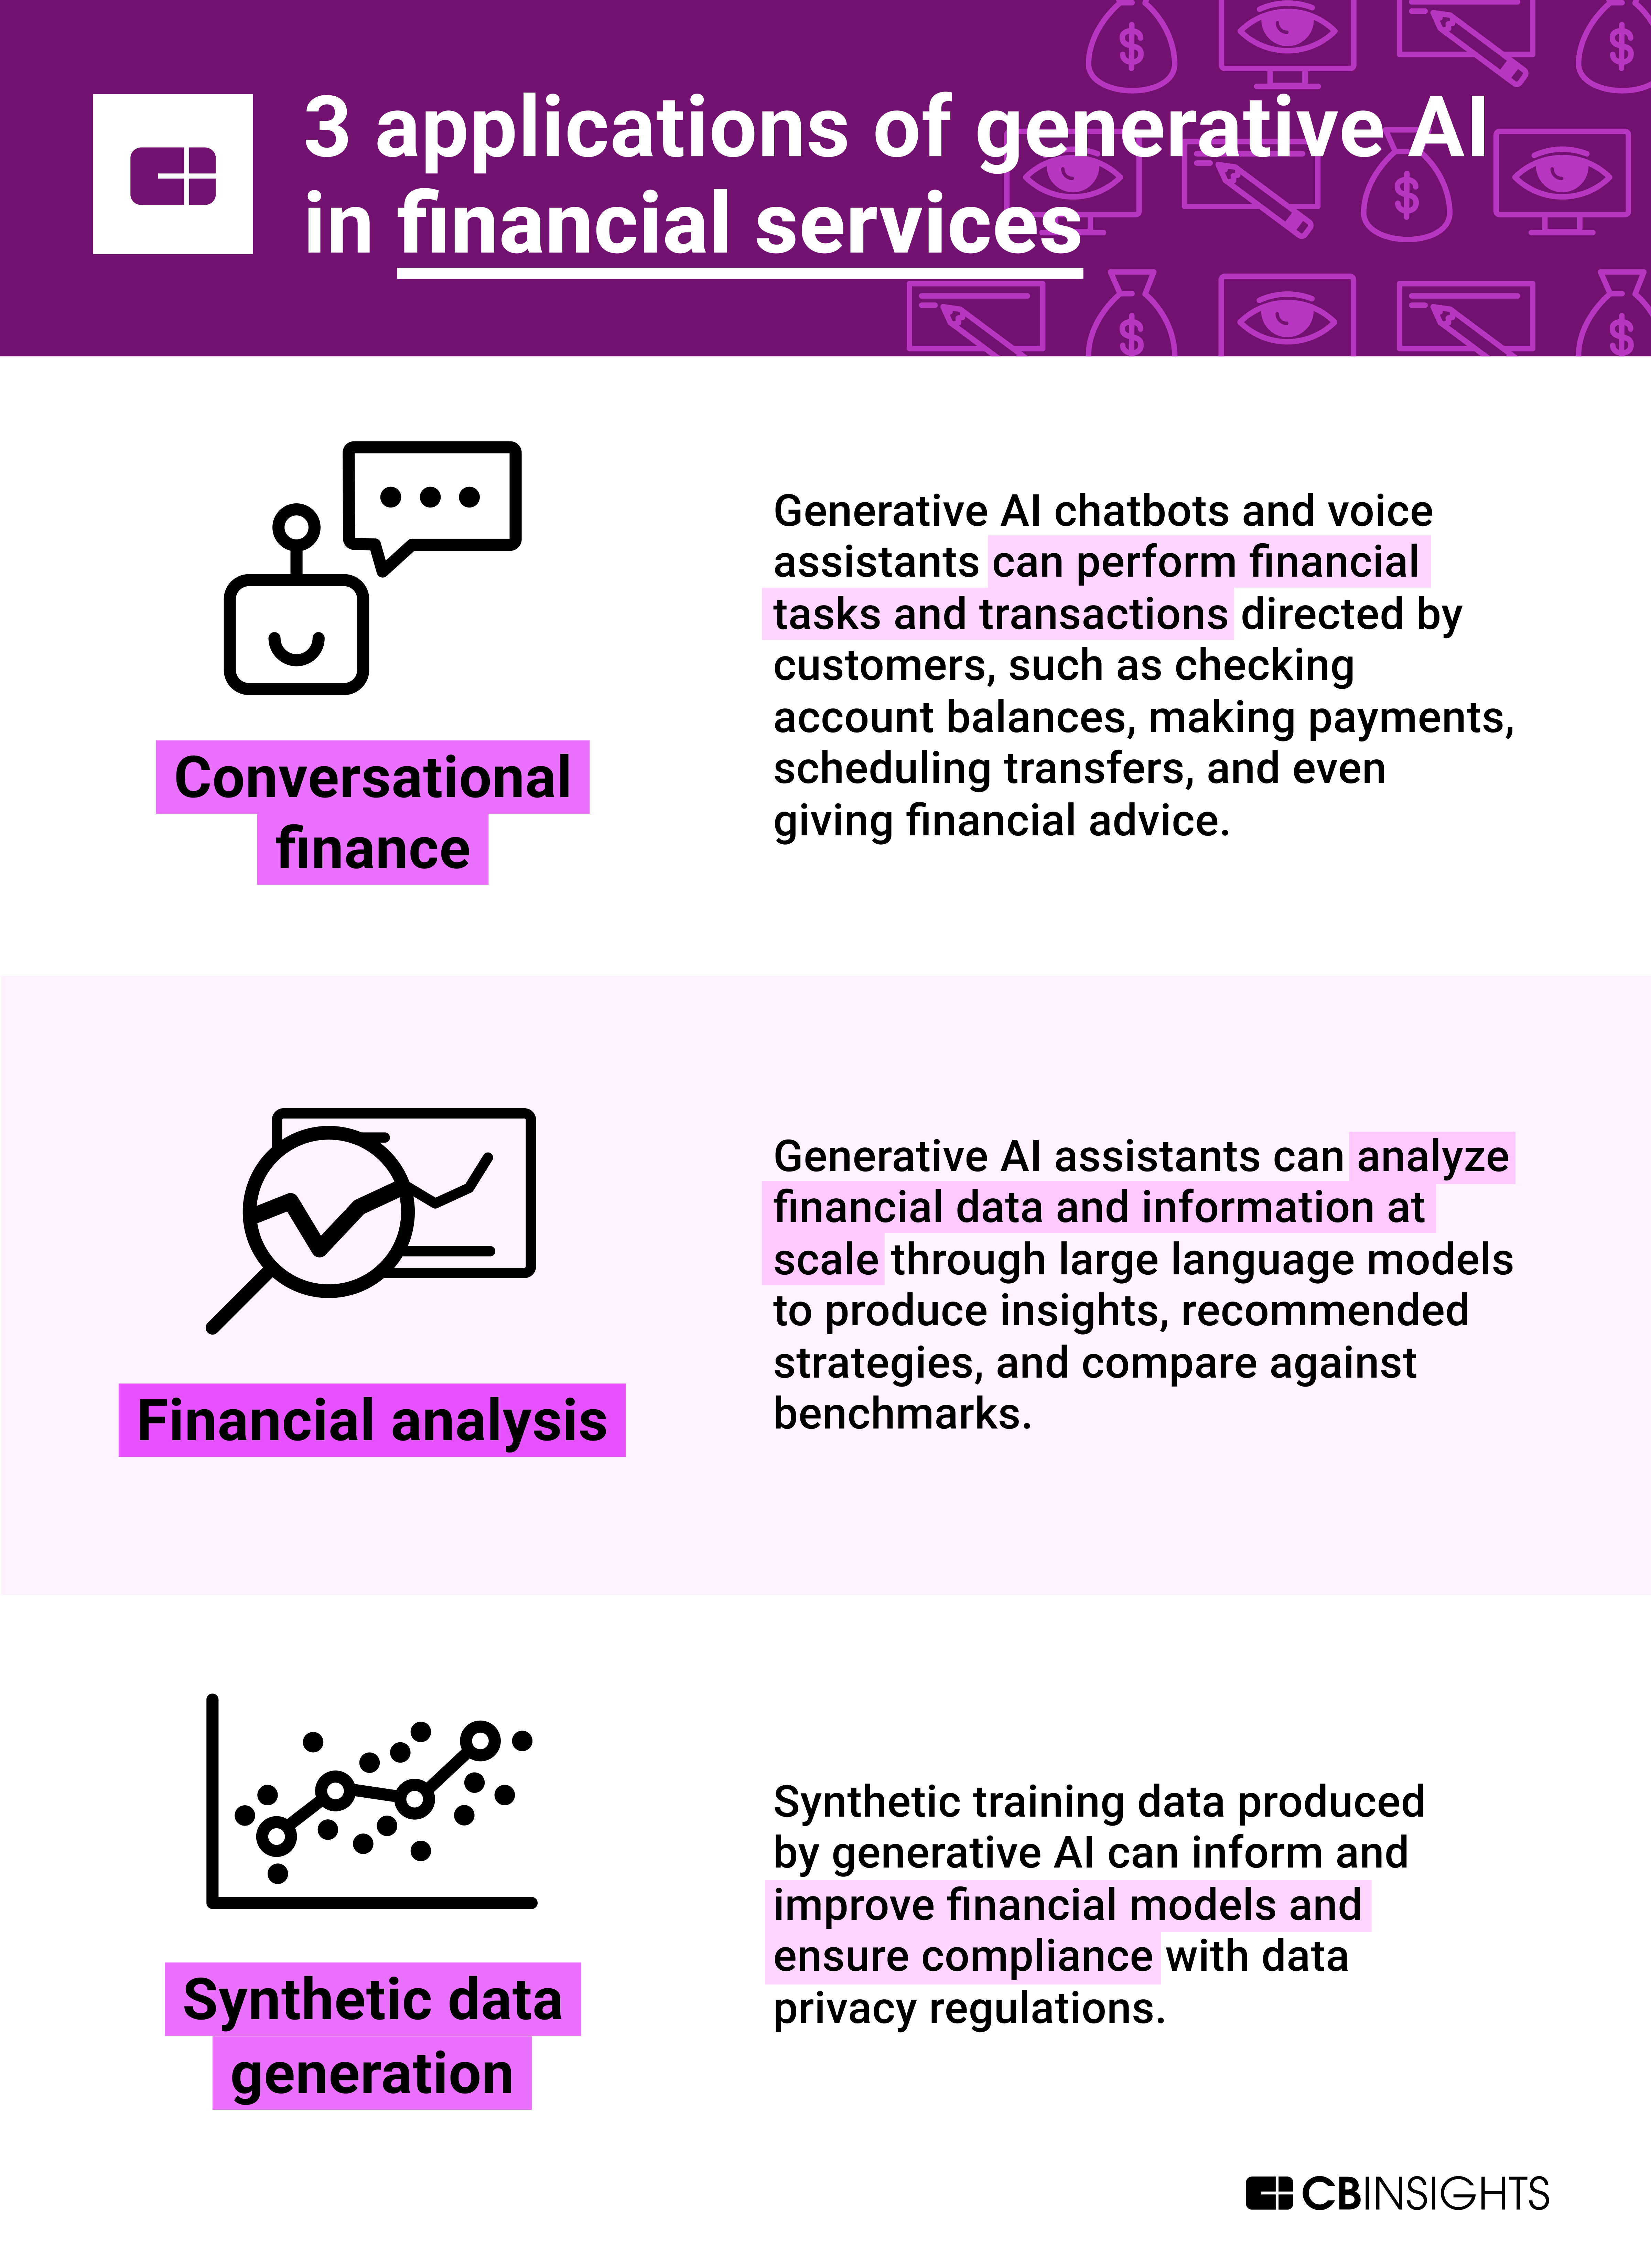 3-applications-of-generative-ai-in-financial-services-cb-insights